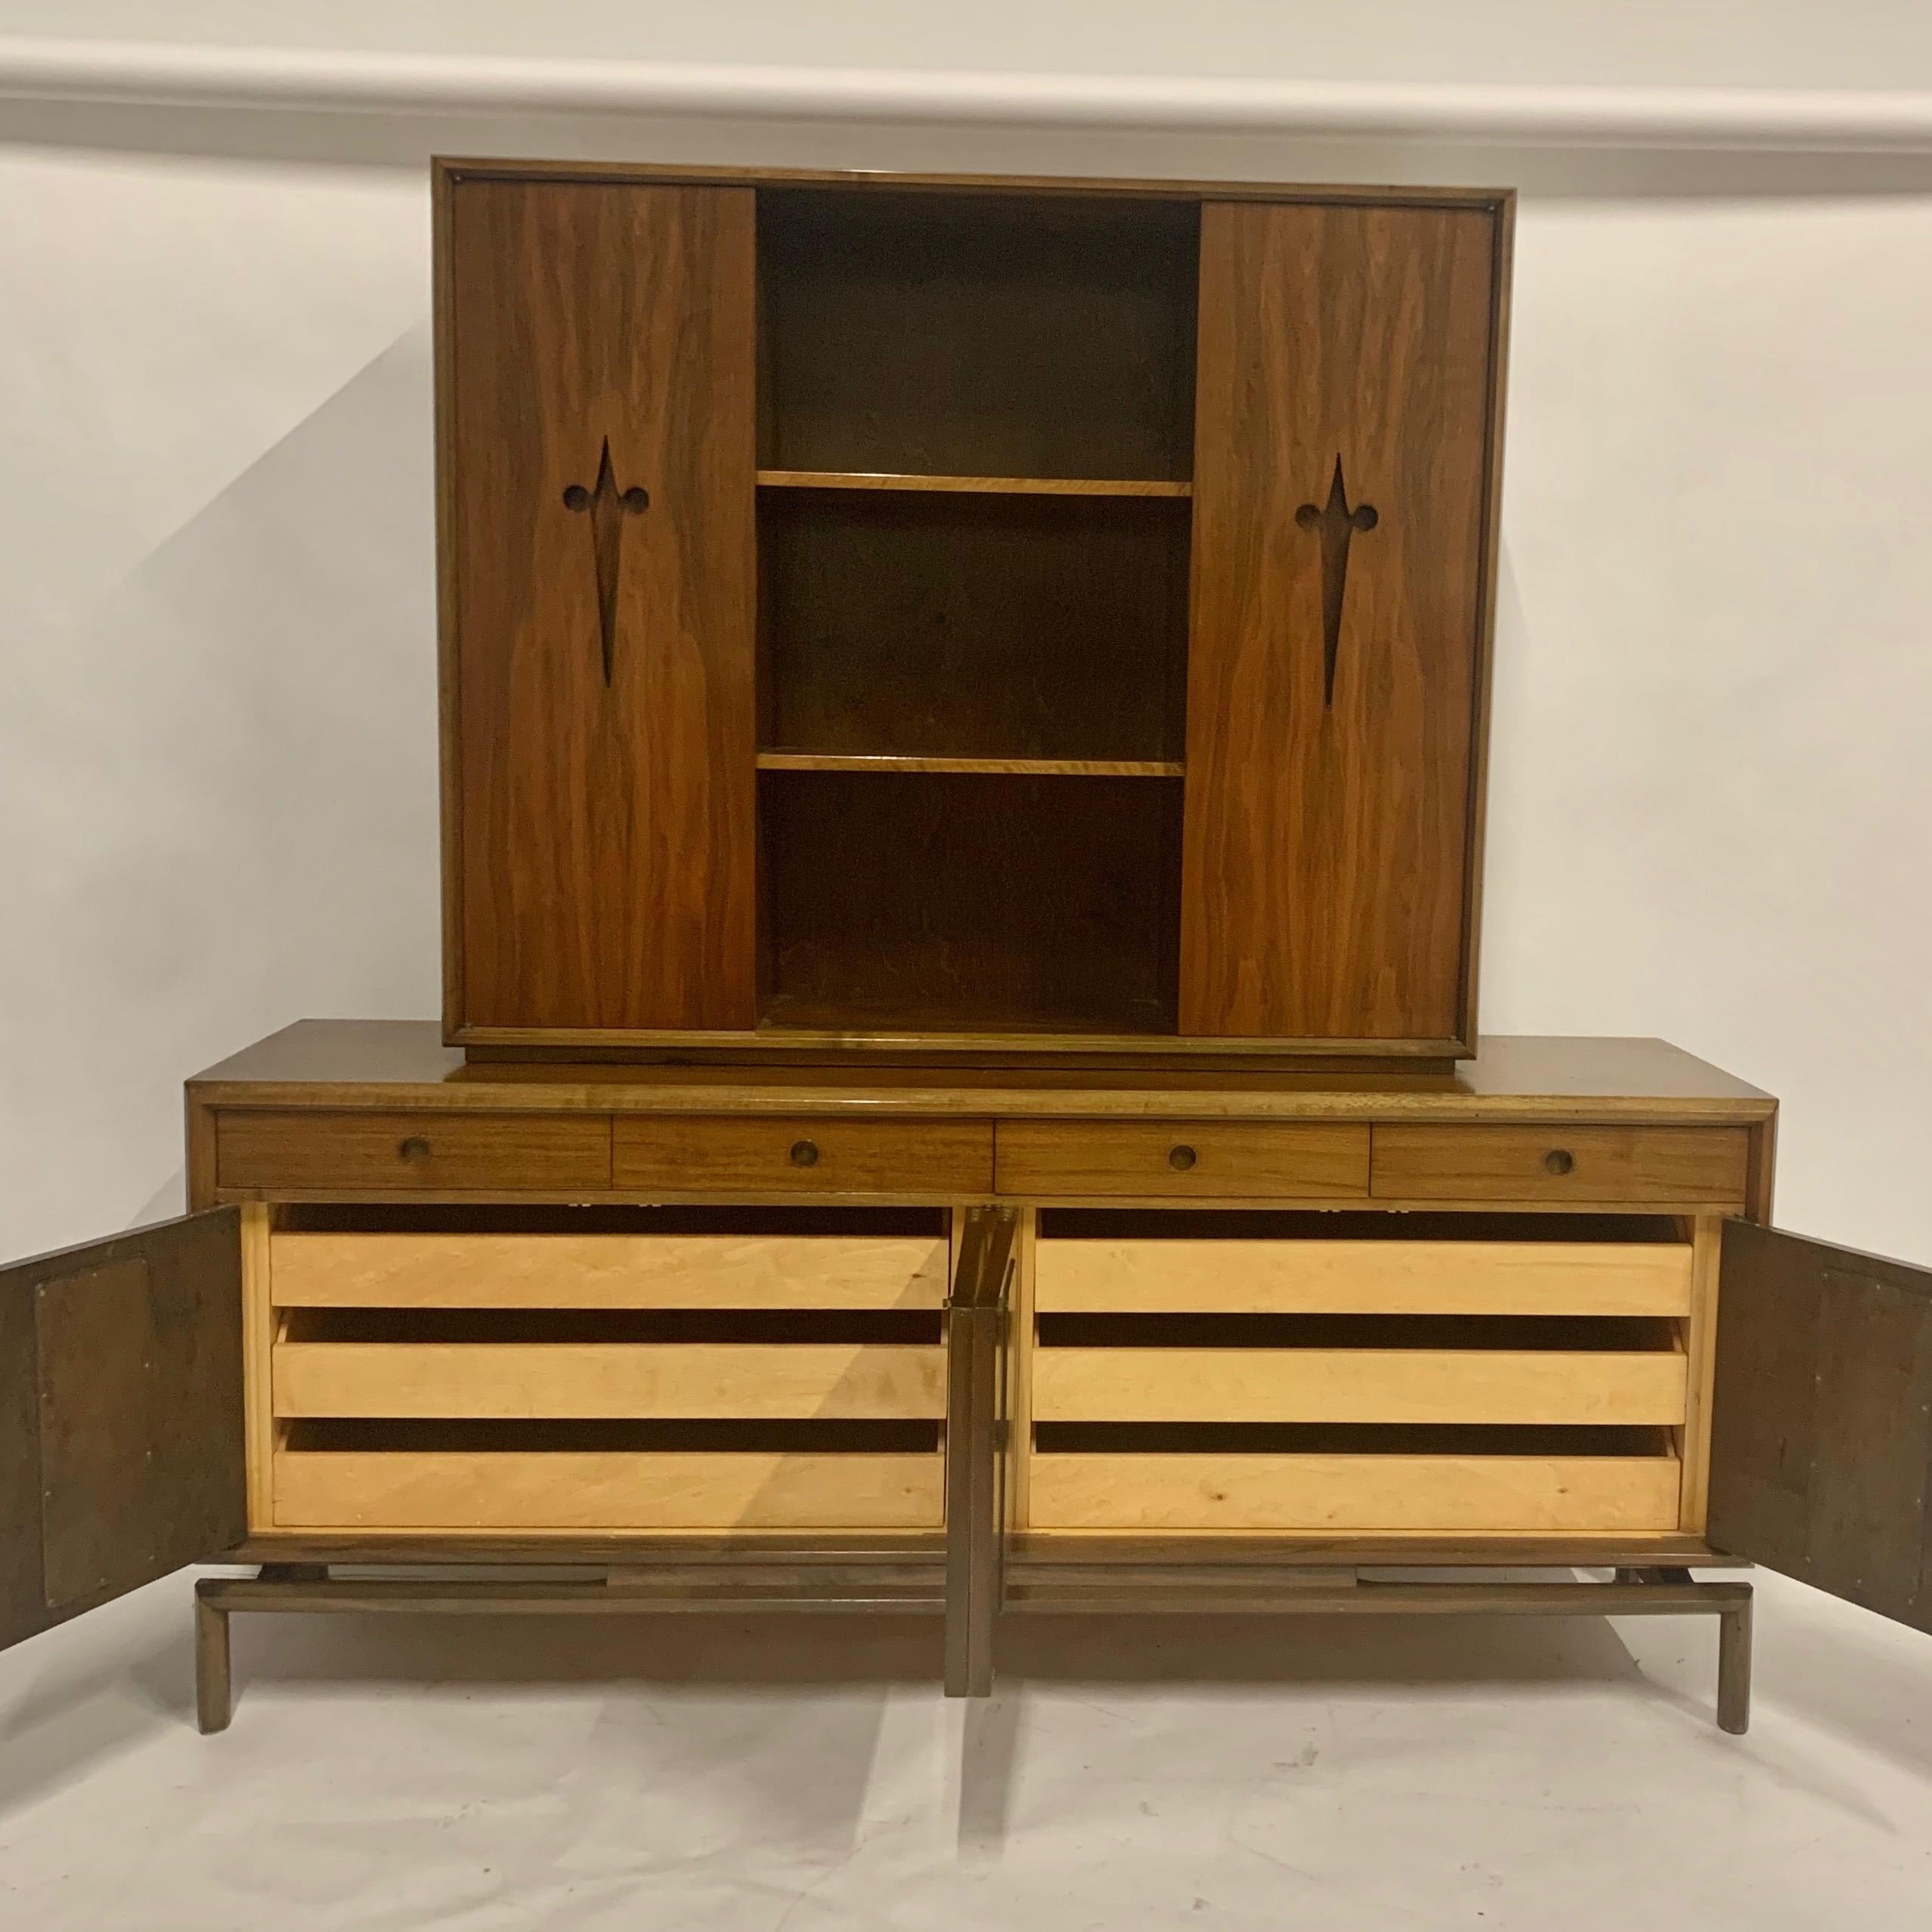 Mid-20th Century Midcentury Edmond J. Spence Stilted Walnut Credenza or Sideboard with Hutch